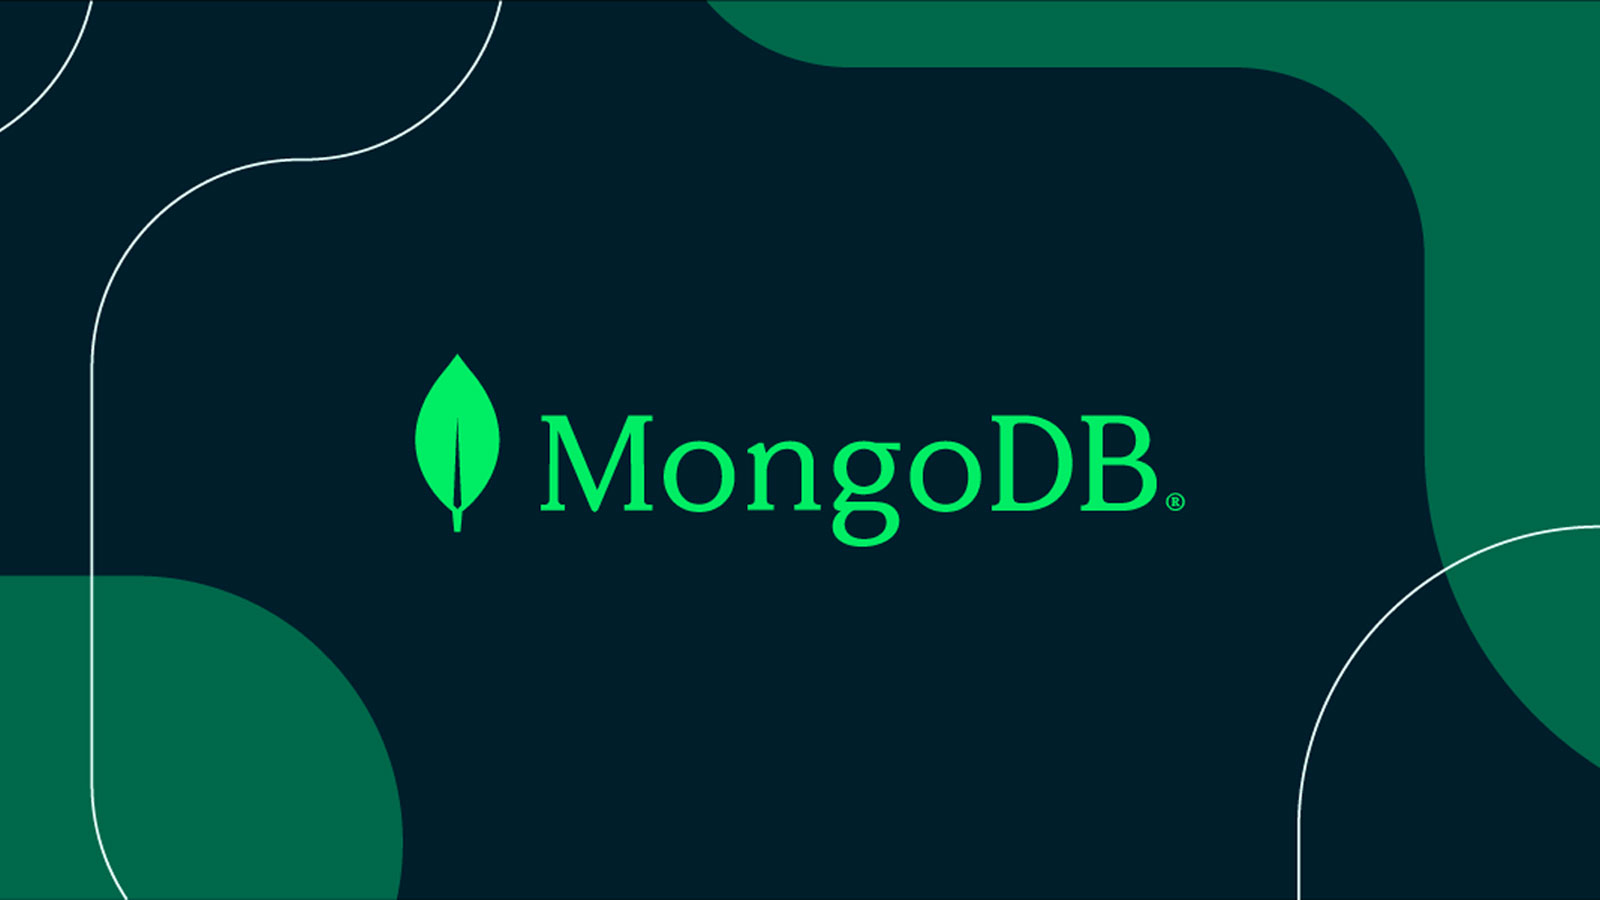 MongoDB Growth Trajectory: AI Integration and Market Expansion